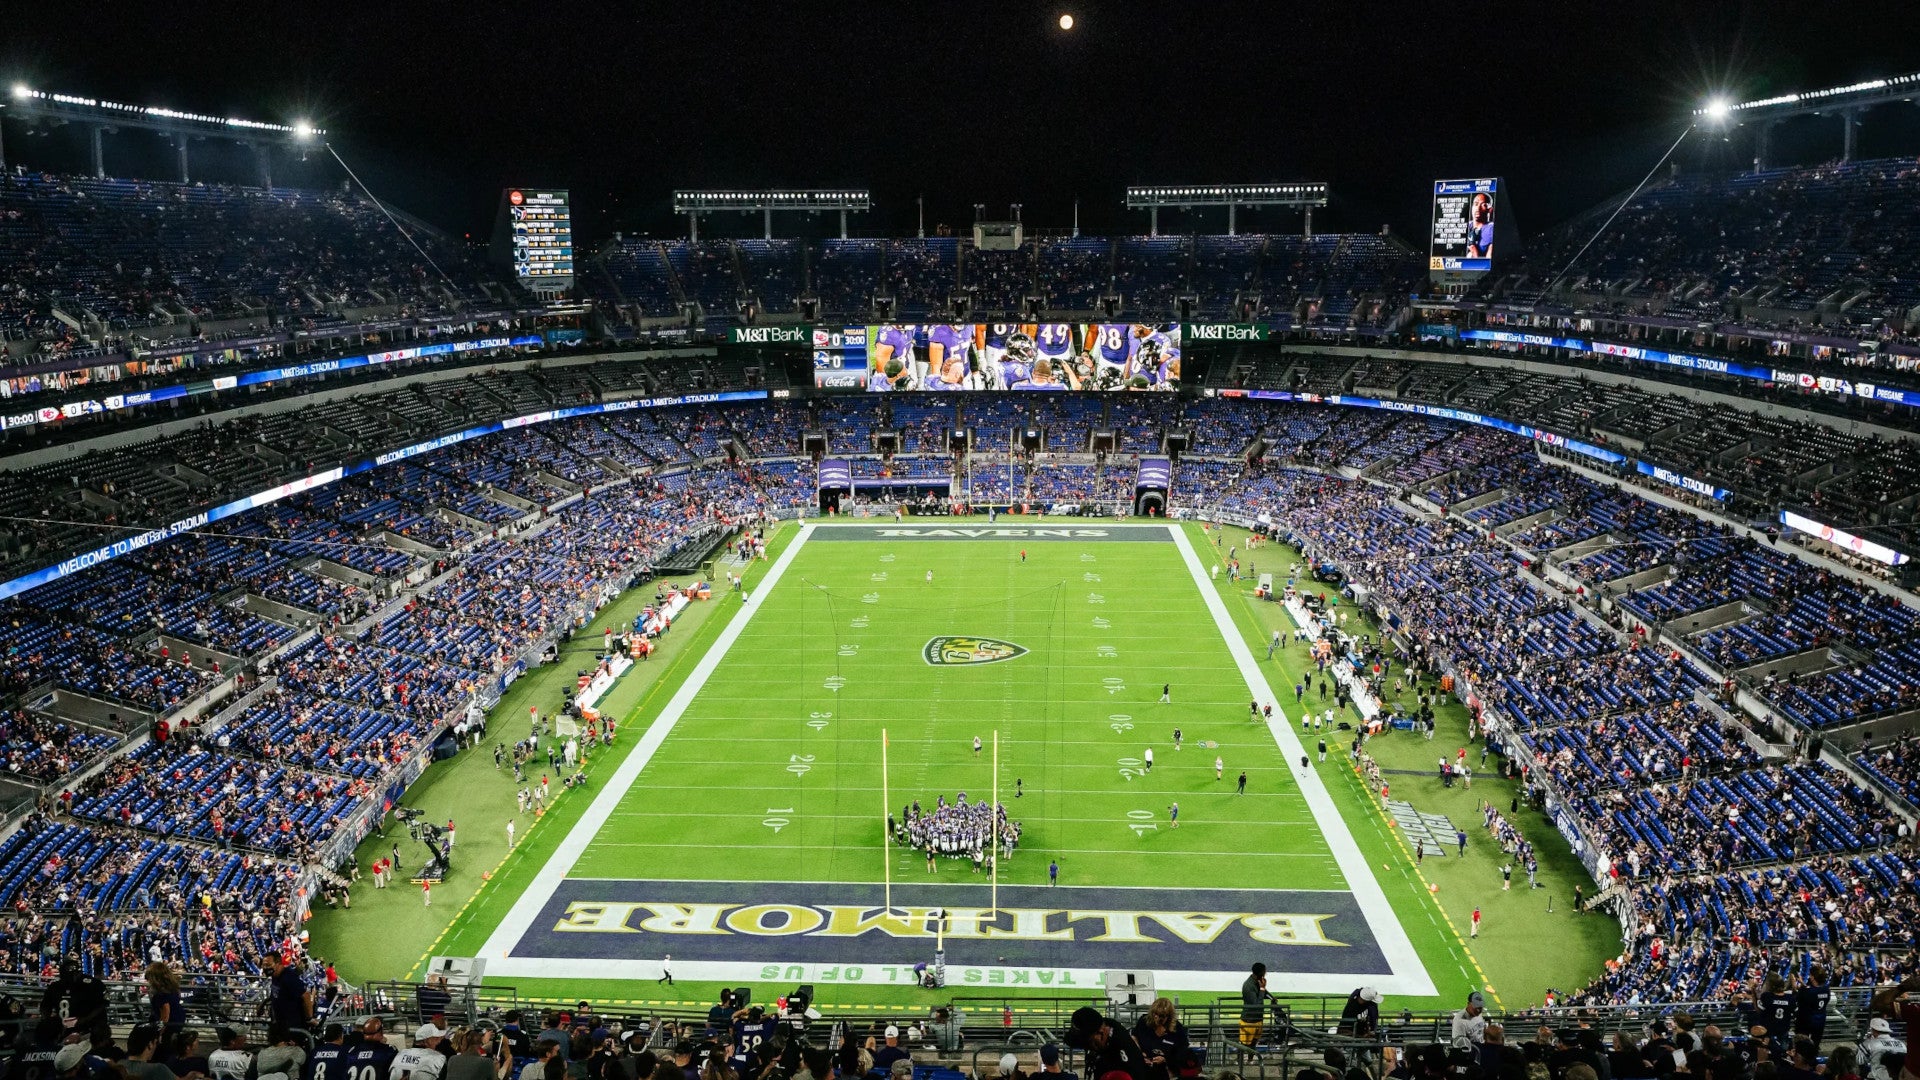 FAA Investigating Drone Incursion at Thursday Night NFL Game